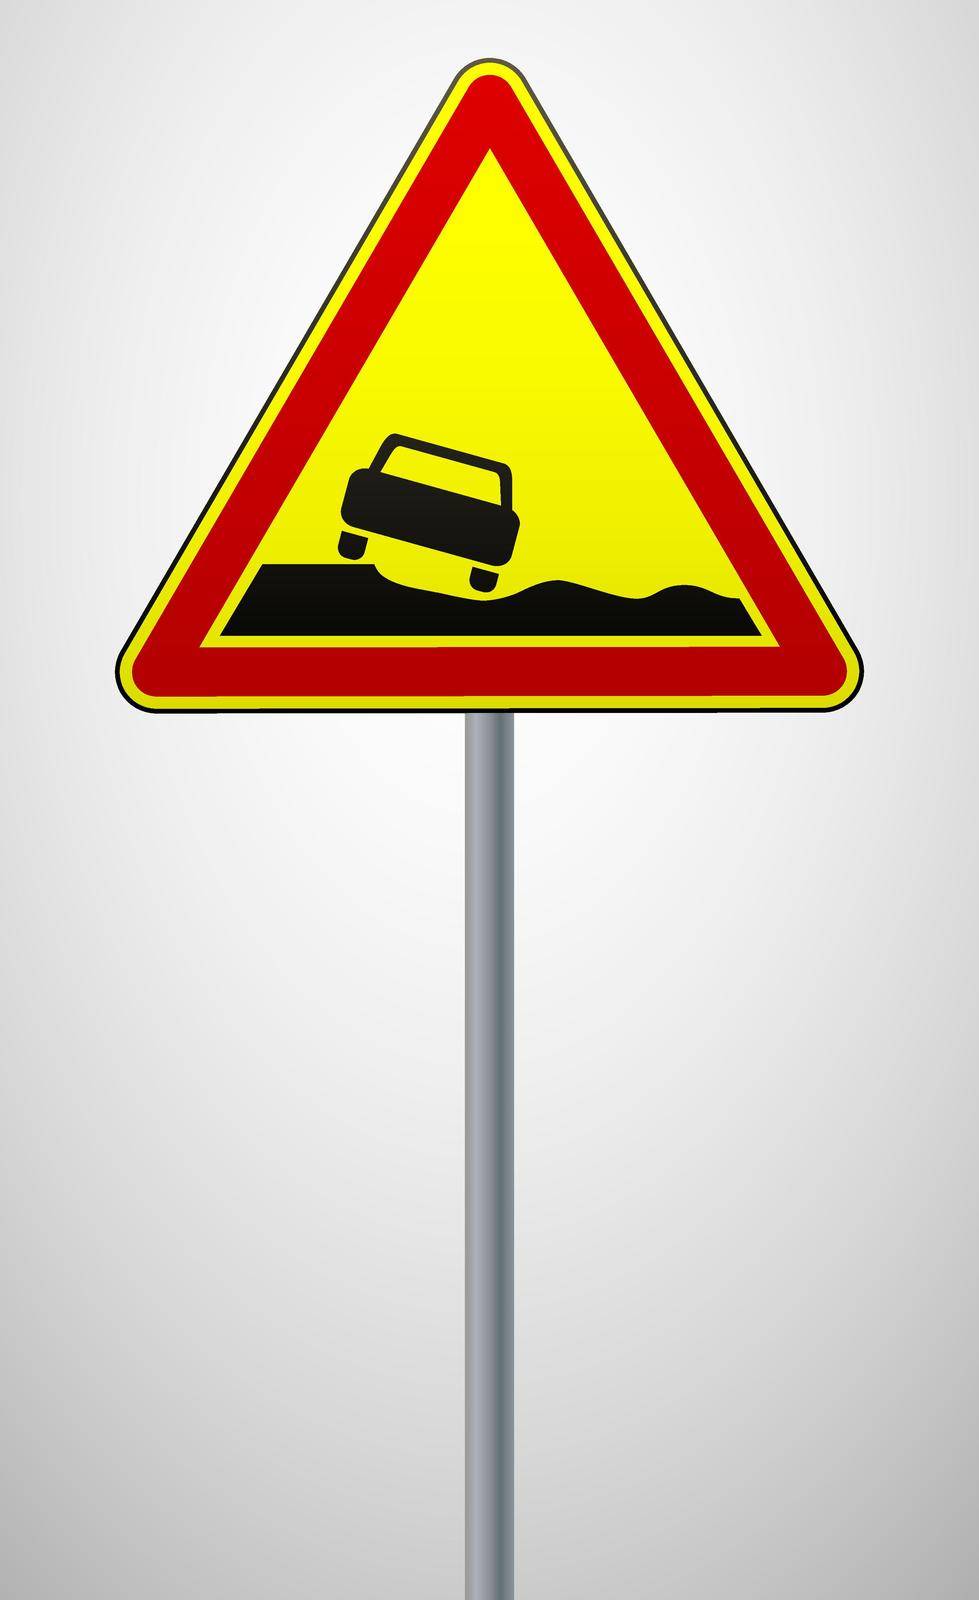 warning road sign dangerous roadside. triangular sign on a metal pole. traffic rules and safe driving. vector illustrations.